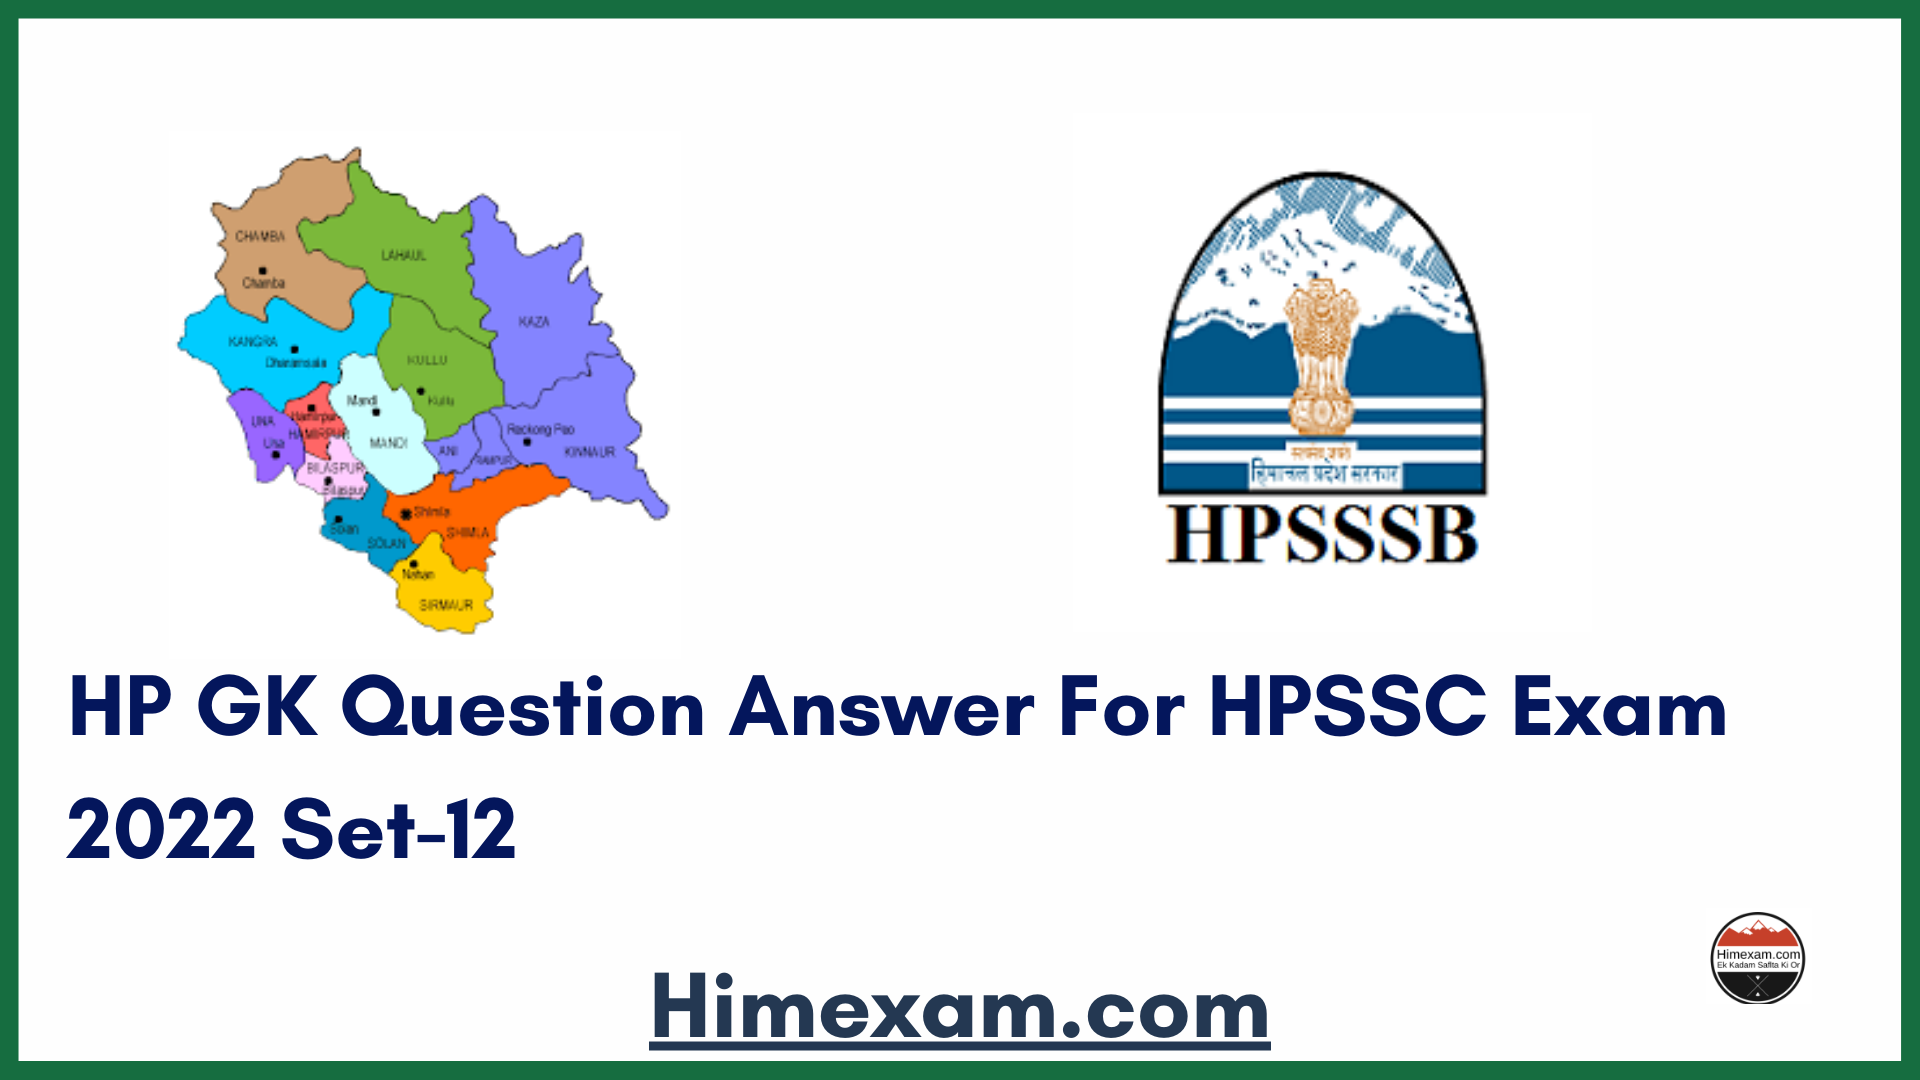 HP GK Question Answer For HPSSC Exam 2022 Set-12